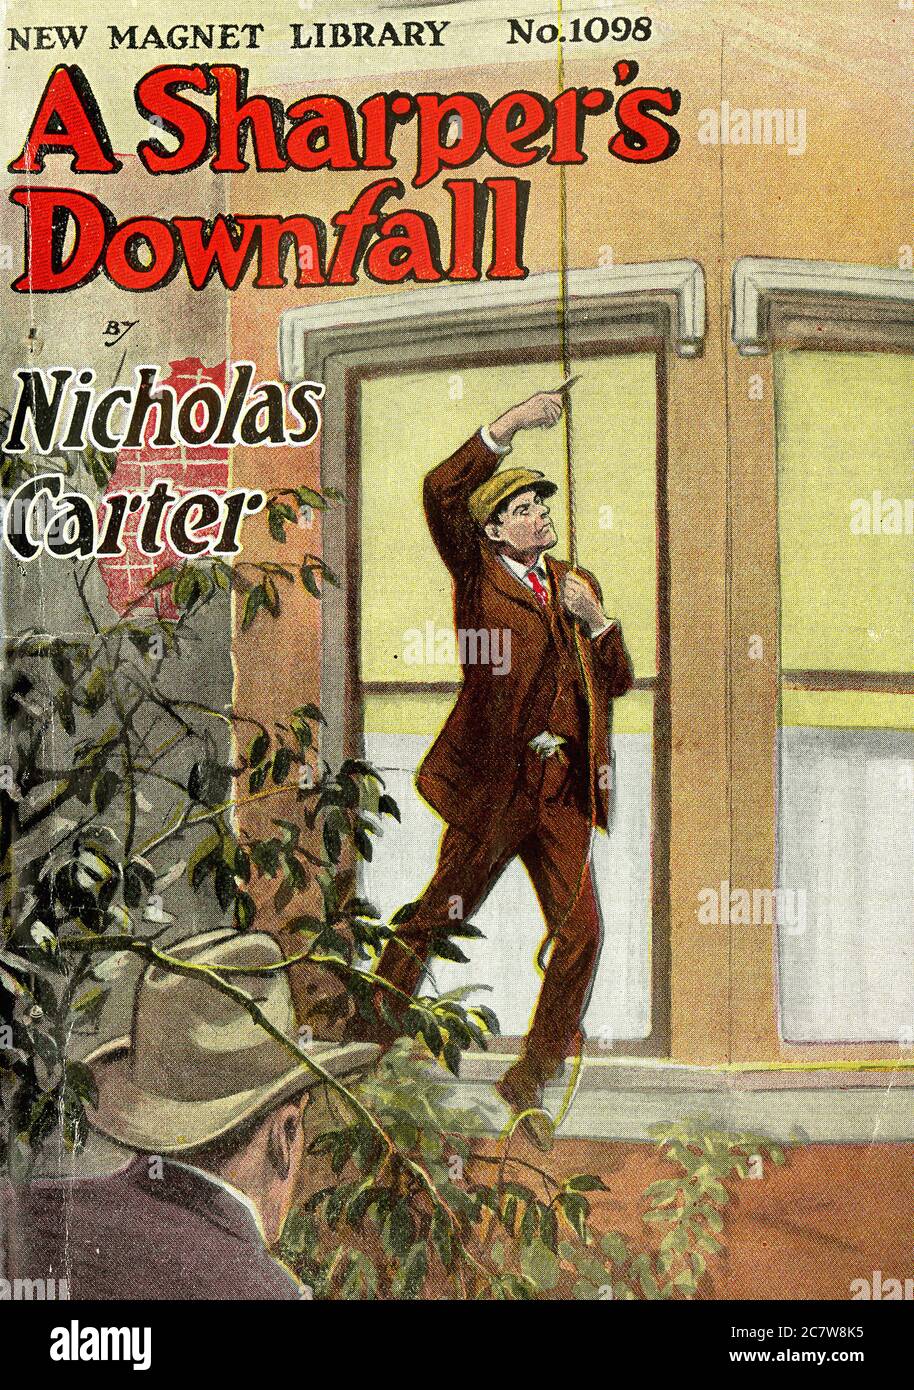 Nicholas Carter - A Sharper's Downfall - New Magnet Library - Vintage Pulp Literary Stock Photo